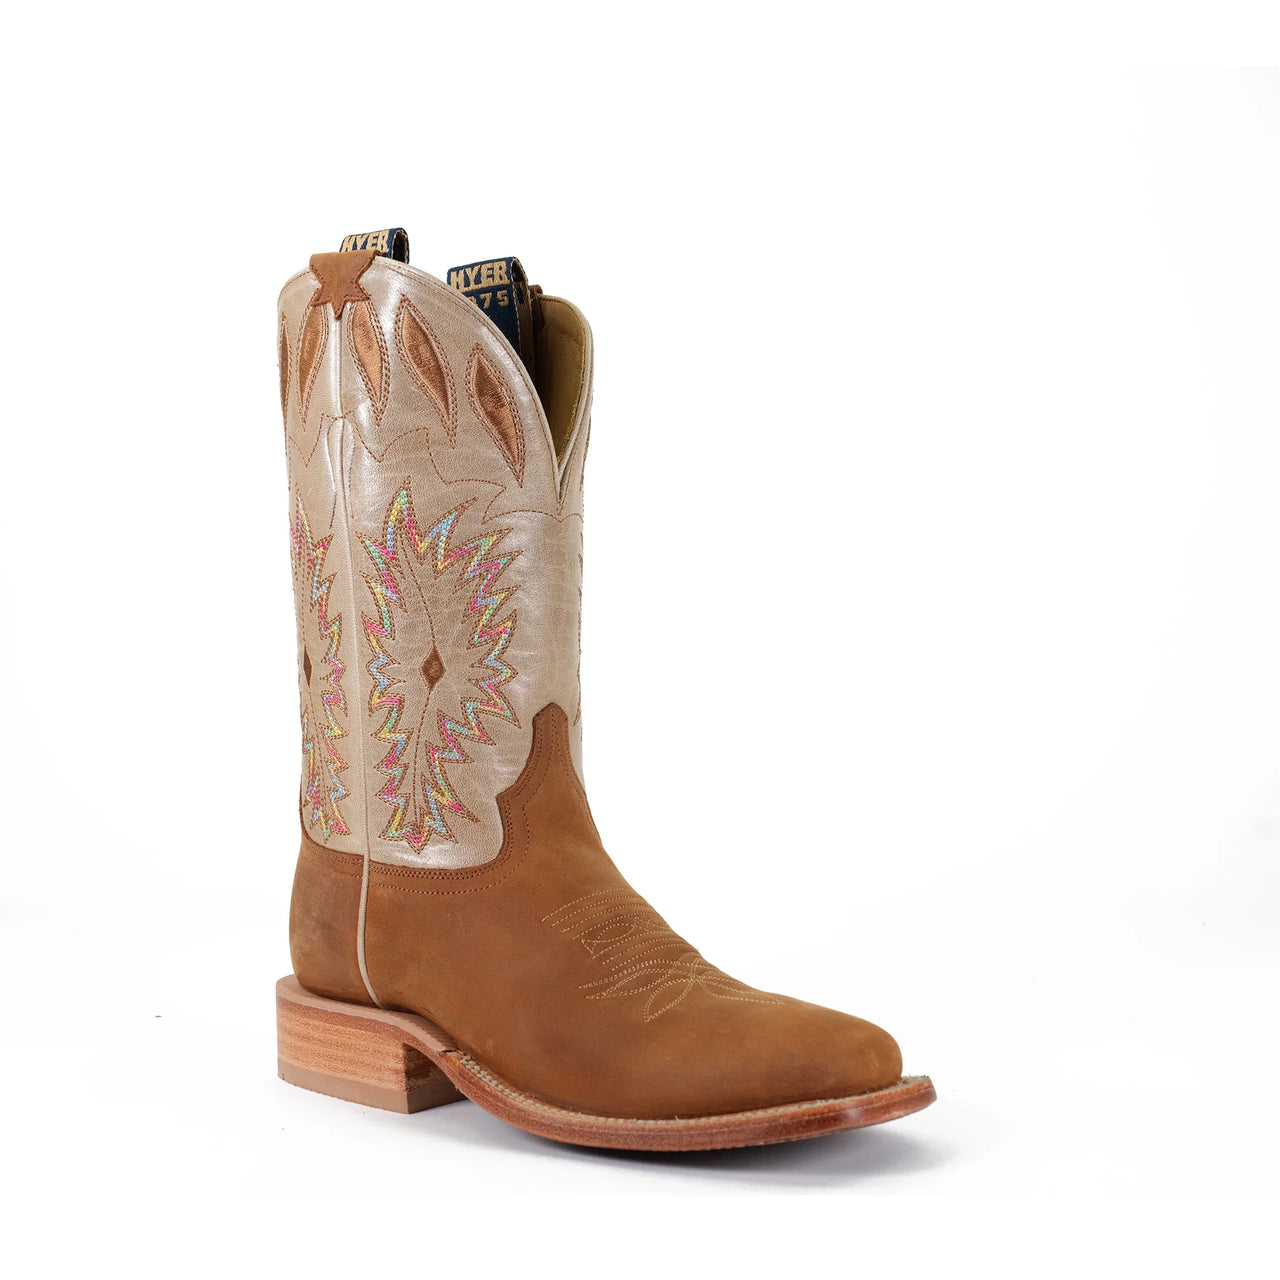 Hyer Women's Mulberry Western Boots - Clay Mule Cowhide